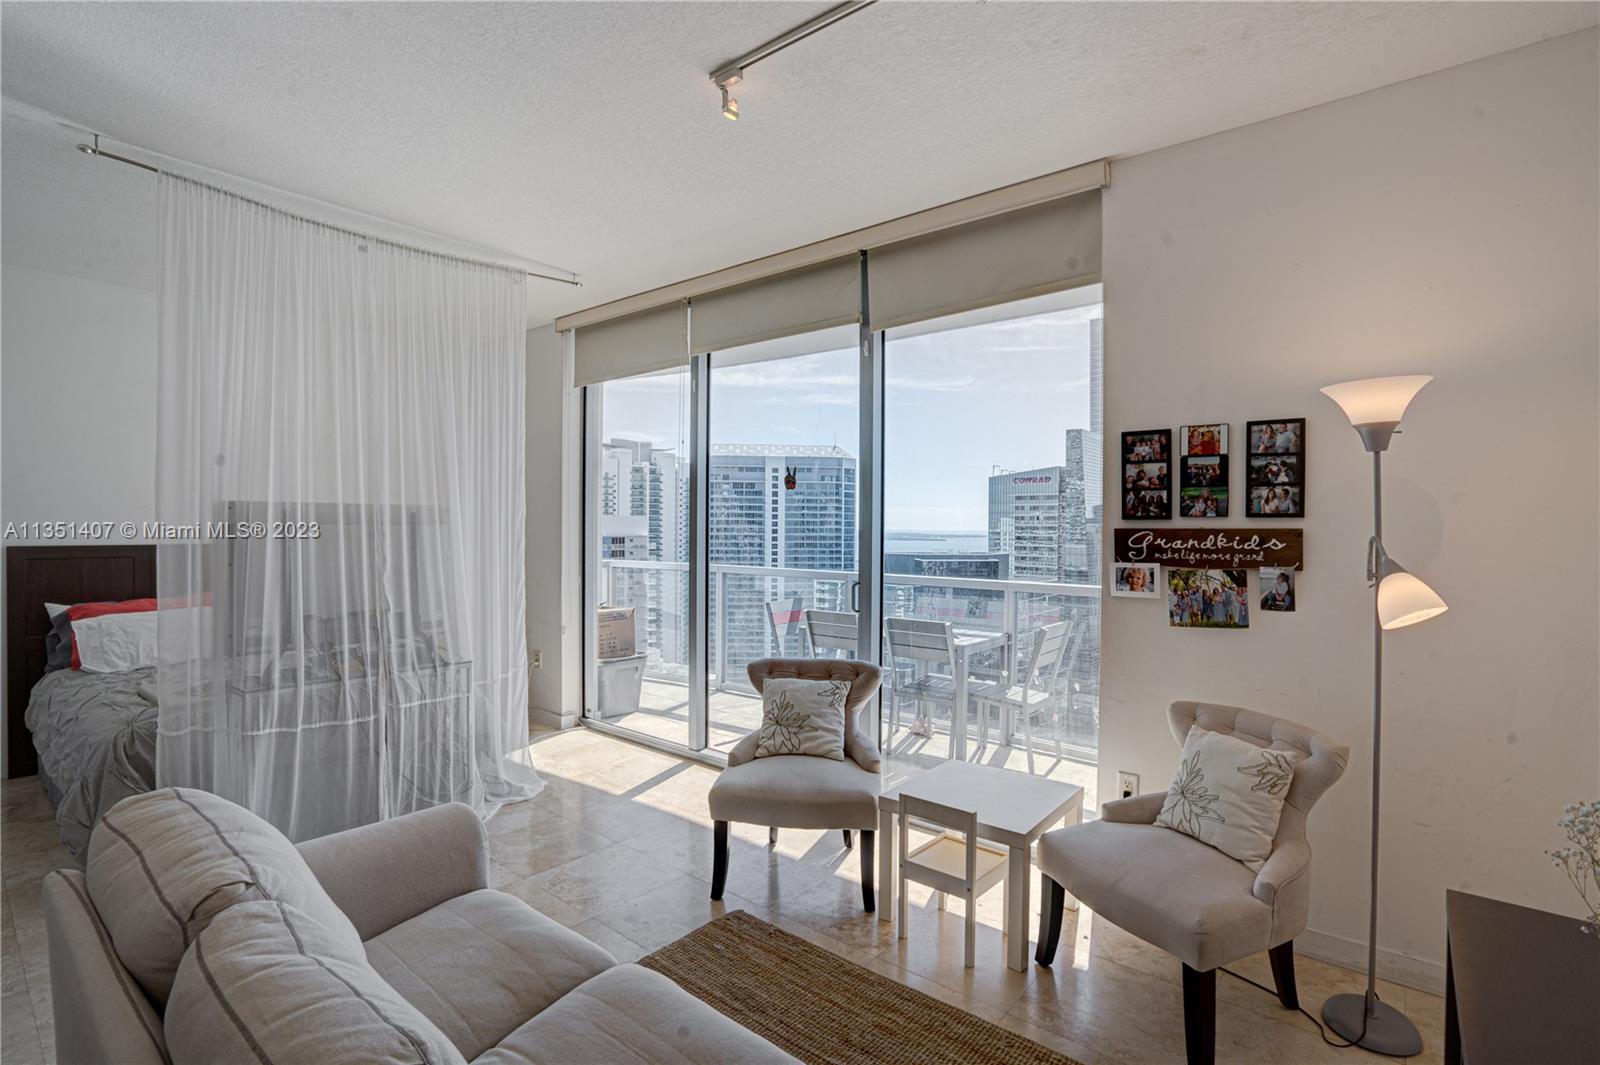 High Floor studio with beautiful view of Miami, Key Biscayne located in the heart of Brickell. impeccable unit with
recent appliances, washer and dryer inside the unit, 1 Parking space assigned, Available April 1st 2023. 
12 months lease only no exception. If active is available